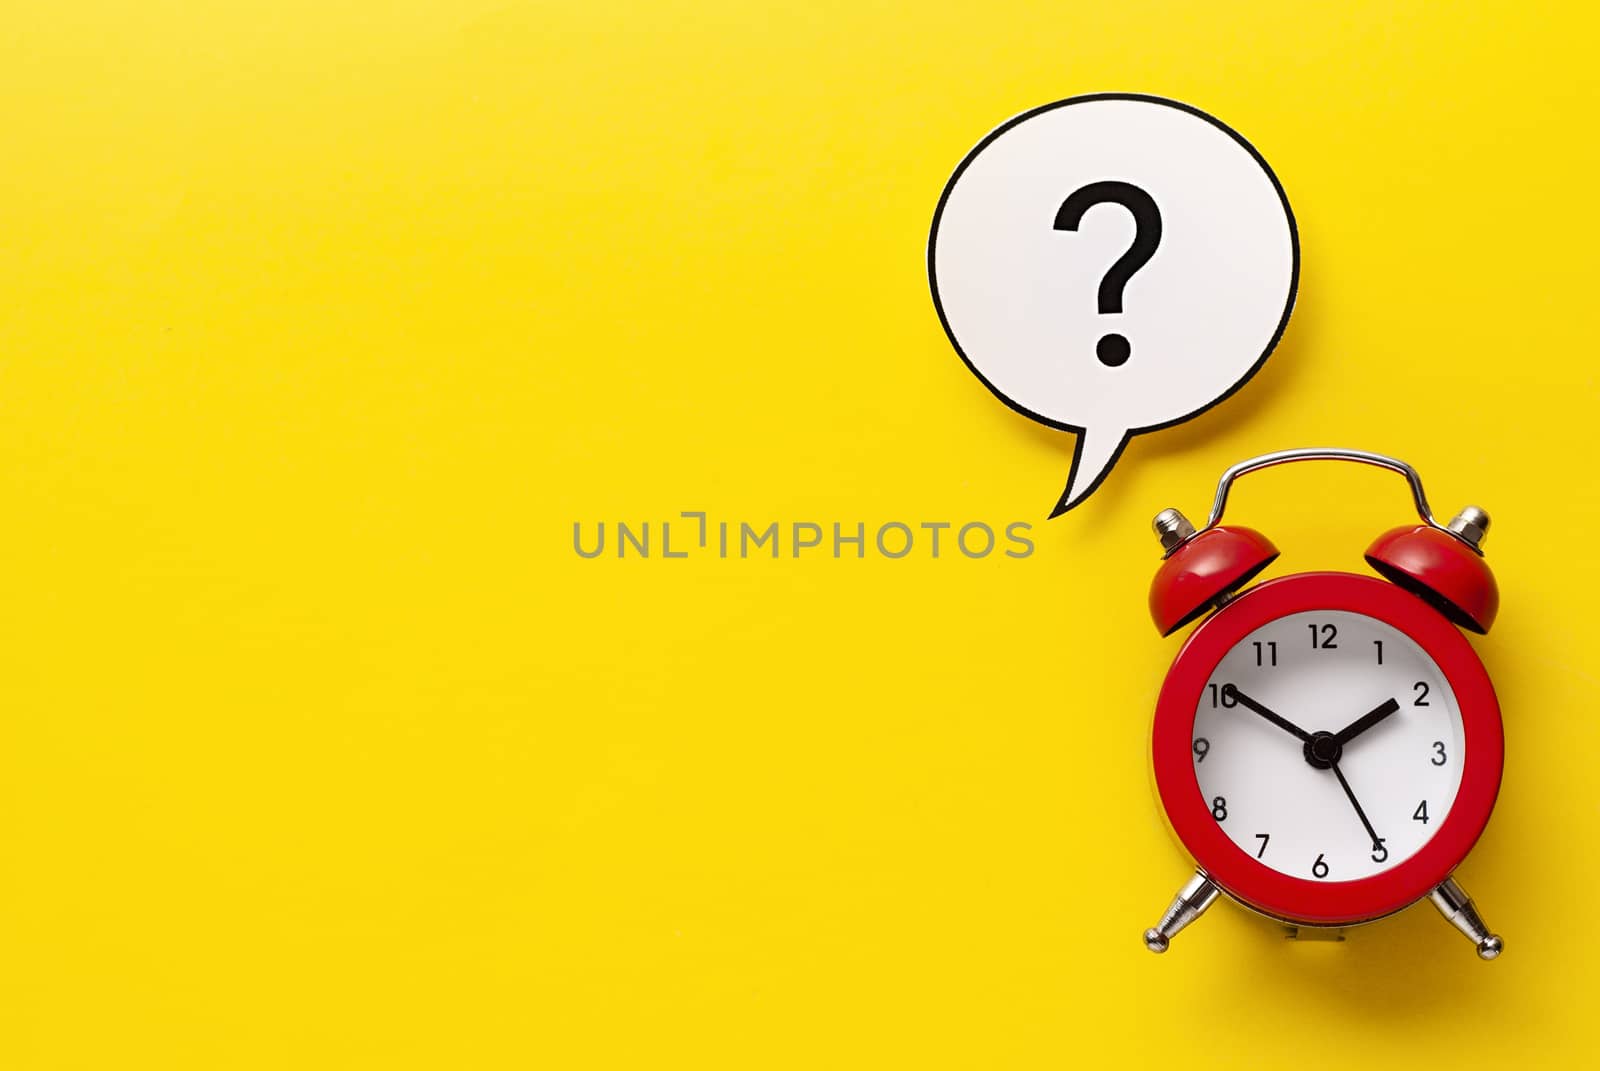 Colourful red alarm clock with question mark inside a speech bubble over a bright yellow background with copy space